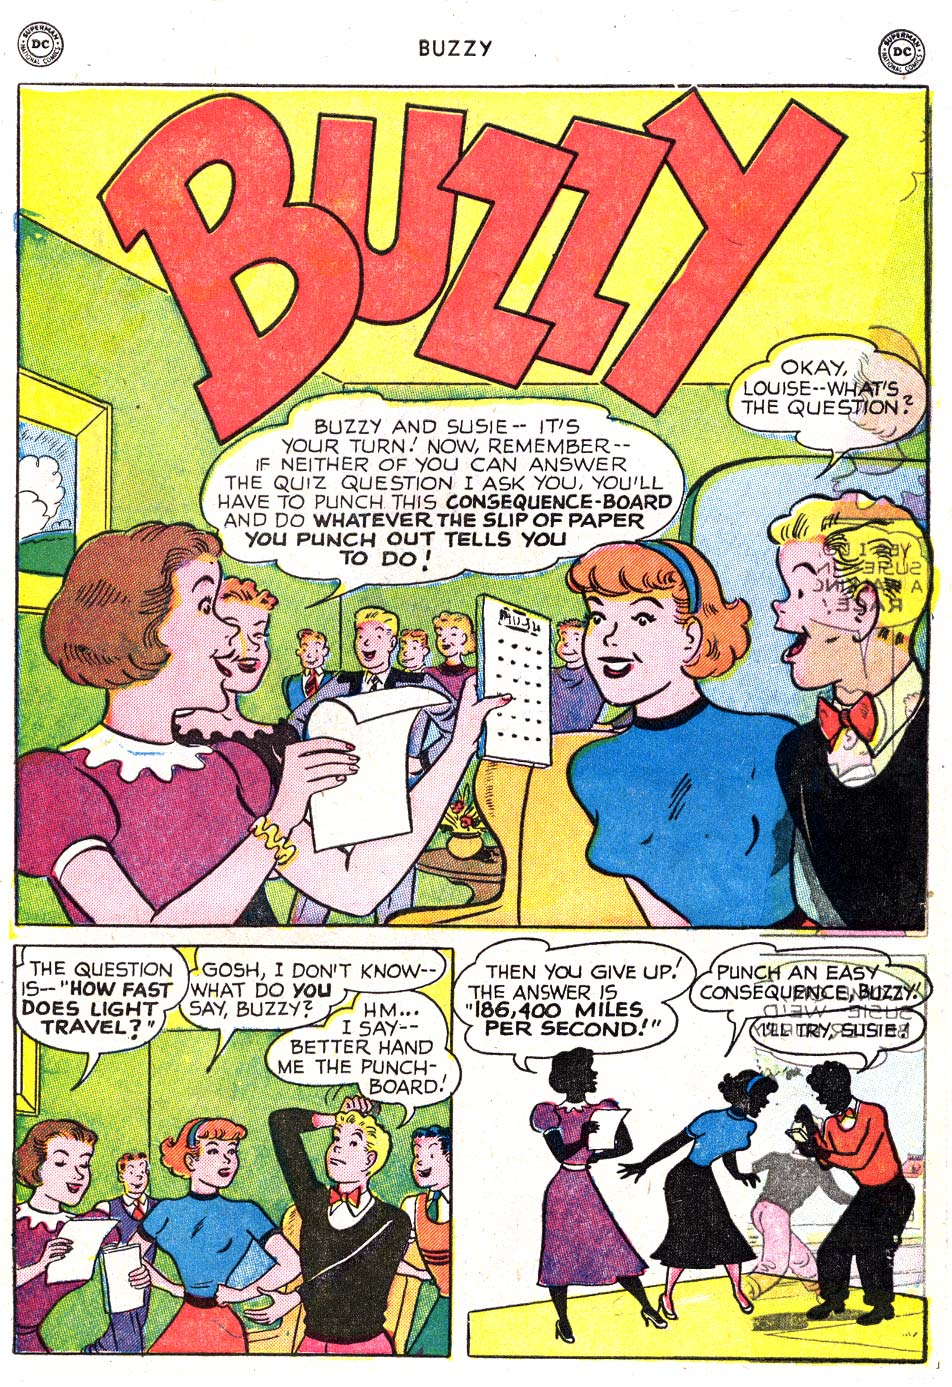 Read online Buzzy comic -  Issue #34 - 11